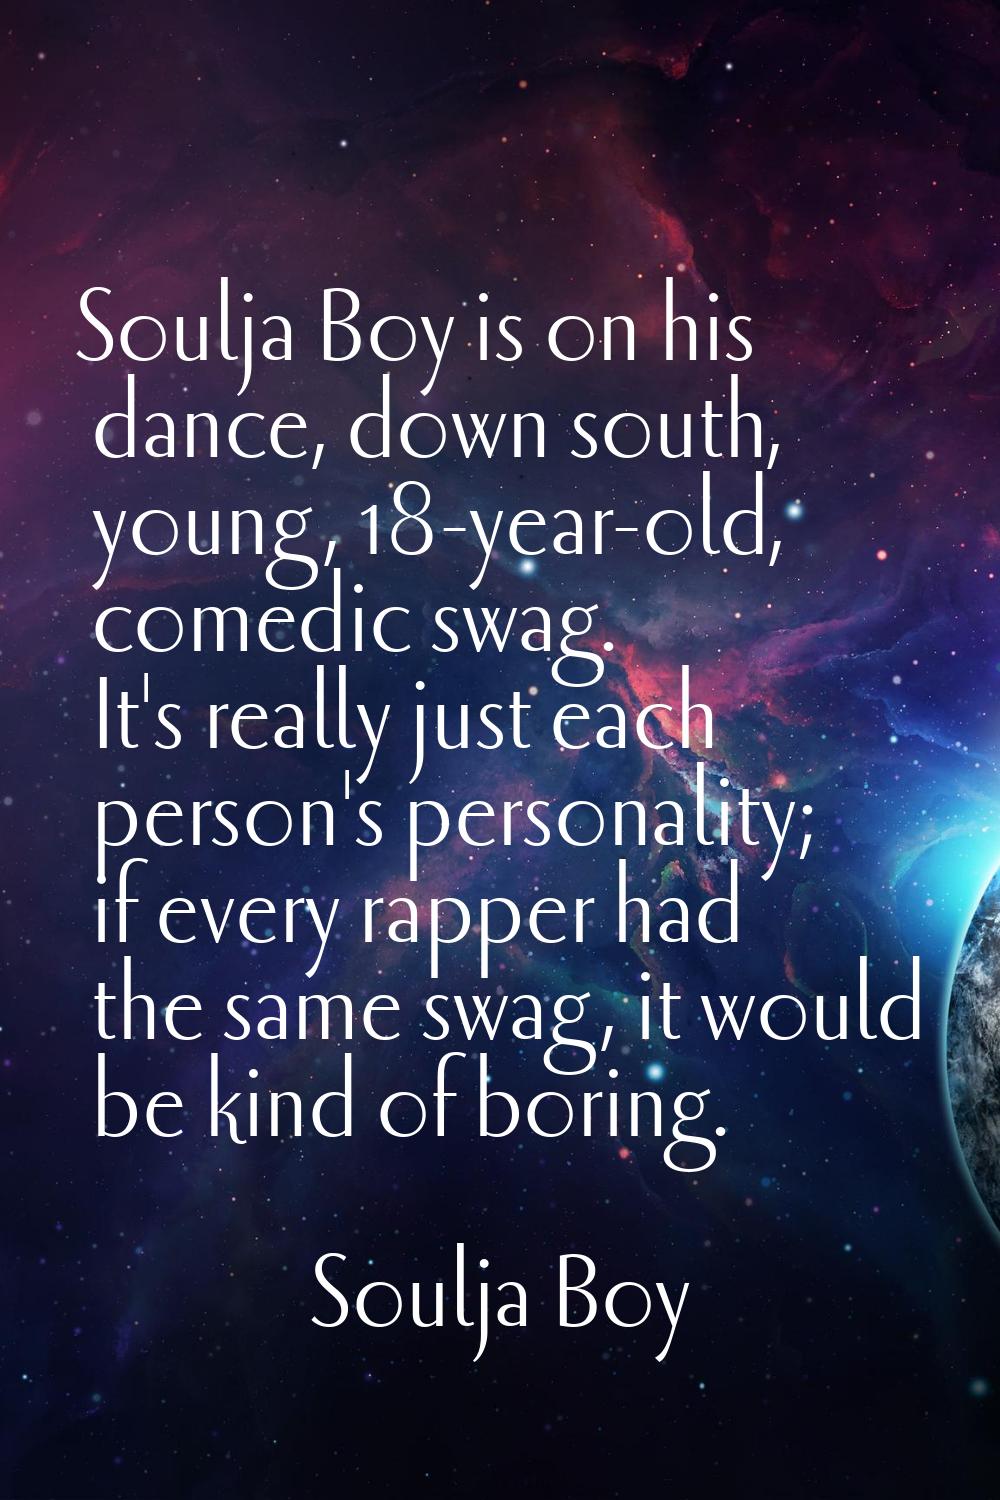 Soulja Boy is on his dance, down south, young, 18-year-old, comedic swag. It's really just each per